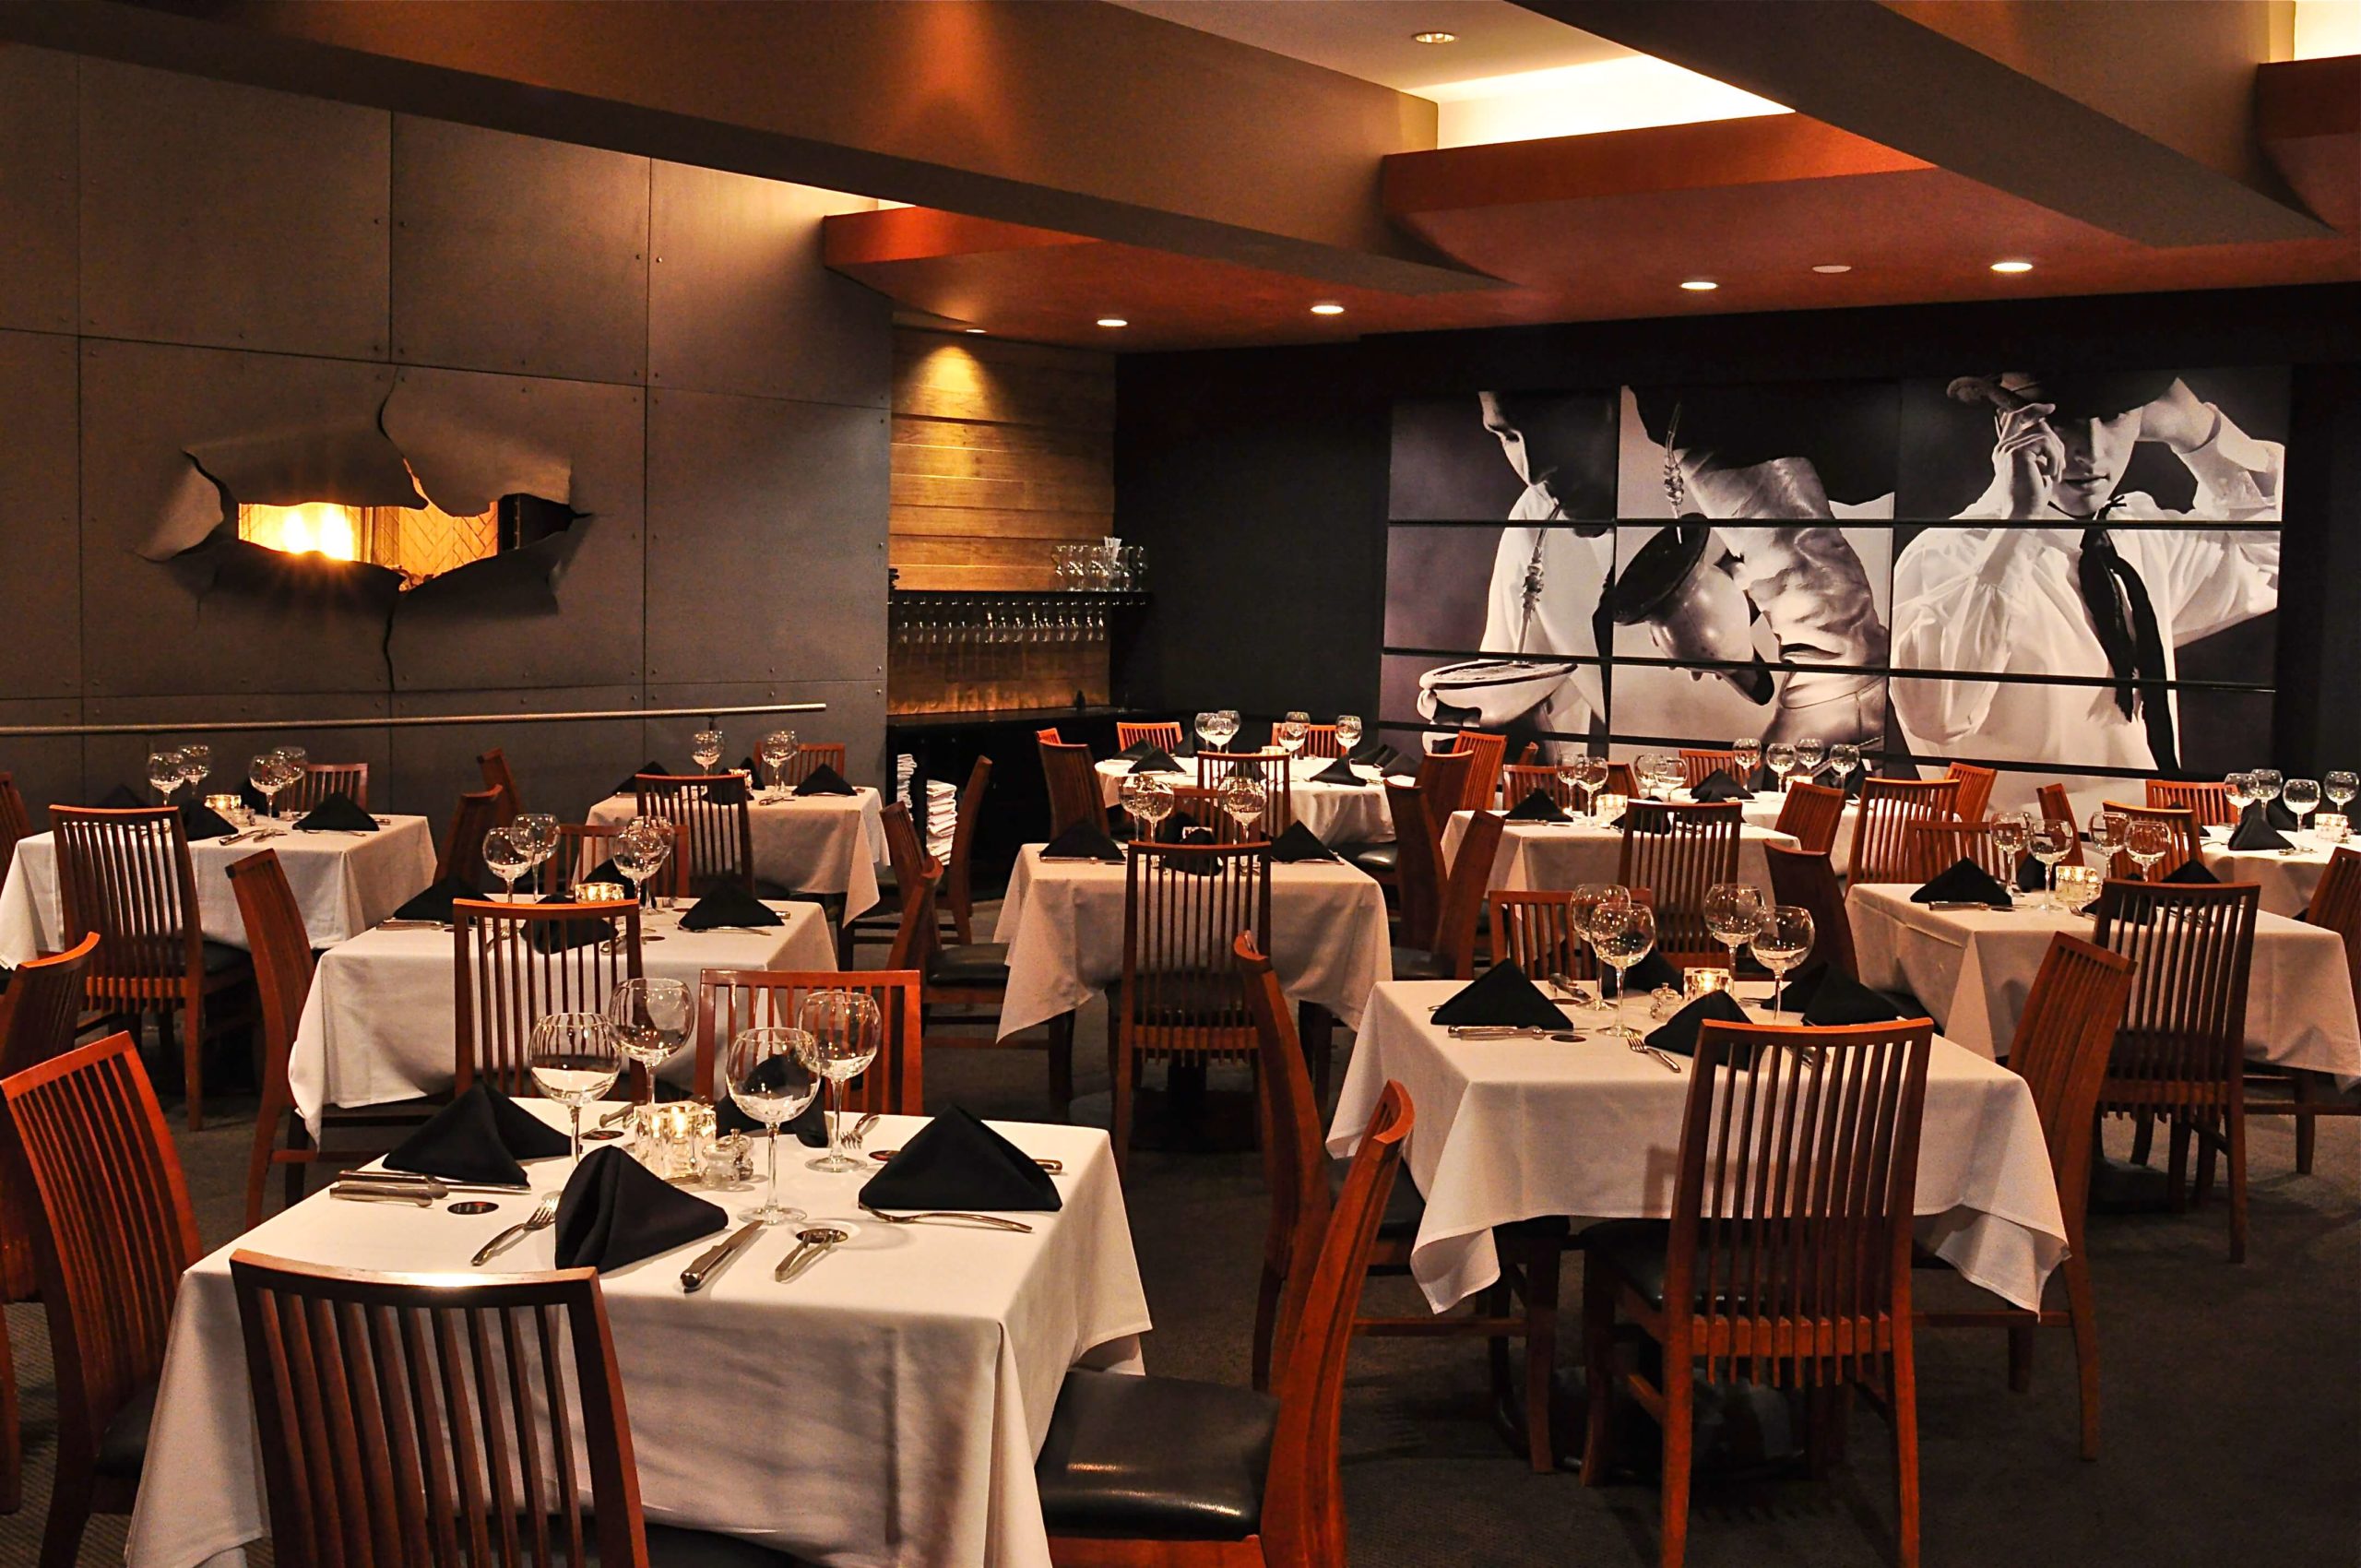 Where Can I Find the Best Fine Dining Experience Fort Lauderdale Has to Offer?